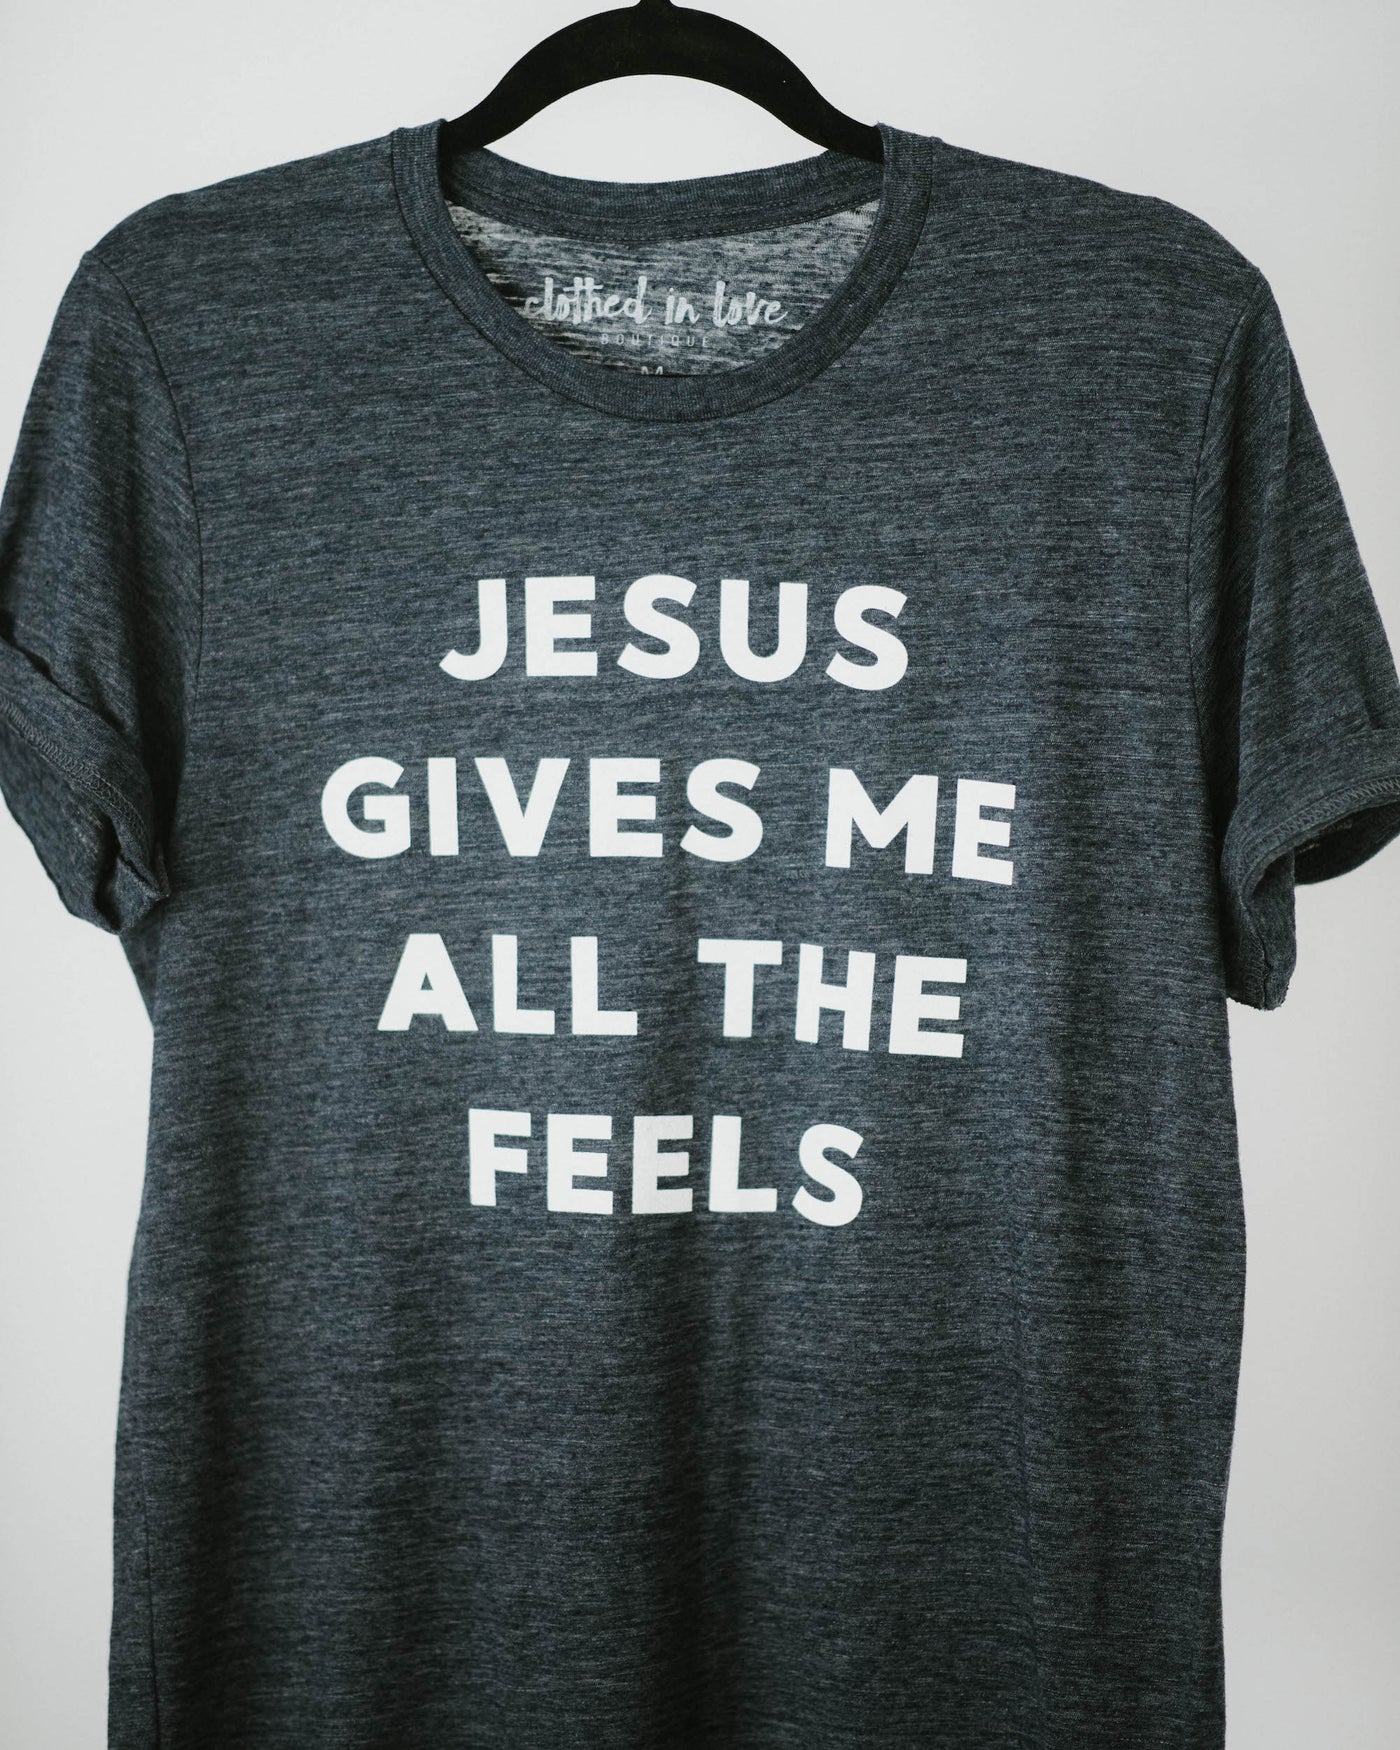 Jesus Gives Me All the Feels Tee - Clothed in Love Boutique